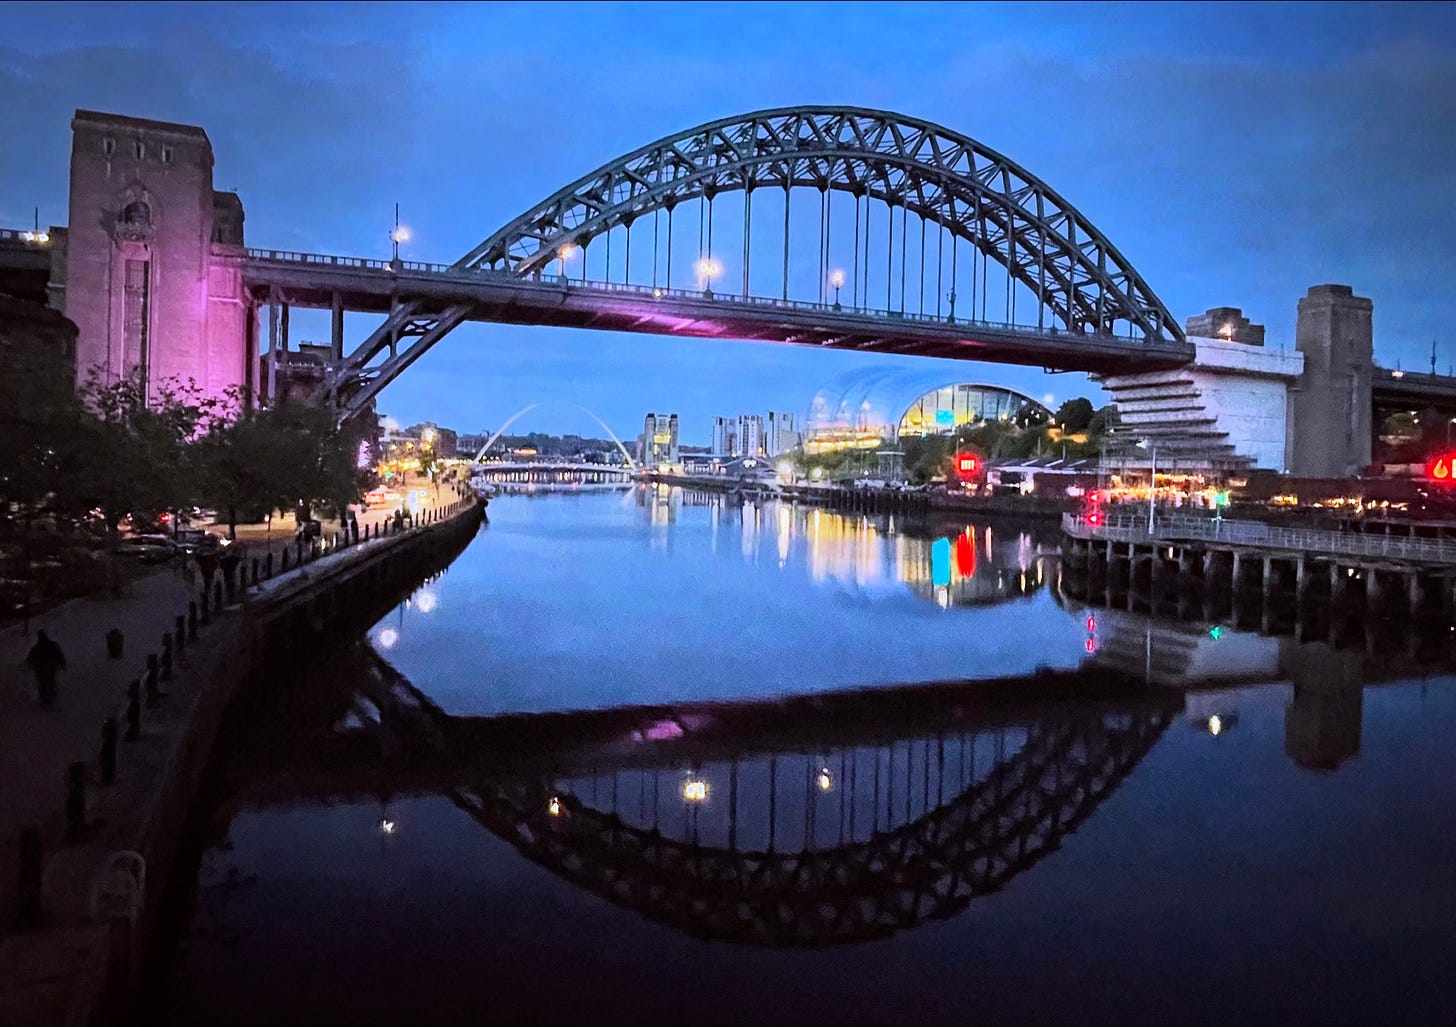 A view from Newcastle/Gateshead's Swing Bridge, up the Tyne to the Tyne Bridge and the Millennium Bridge just visible in the distance. The water is still and the bridges are reflected, the sky is a blue evening light, and the riverside buildings are lit in the dusk.